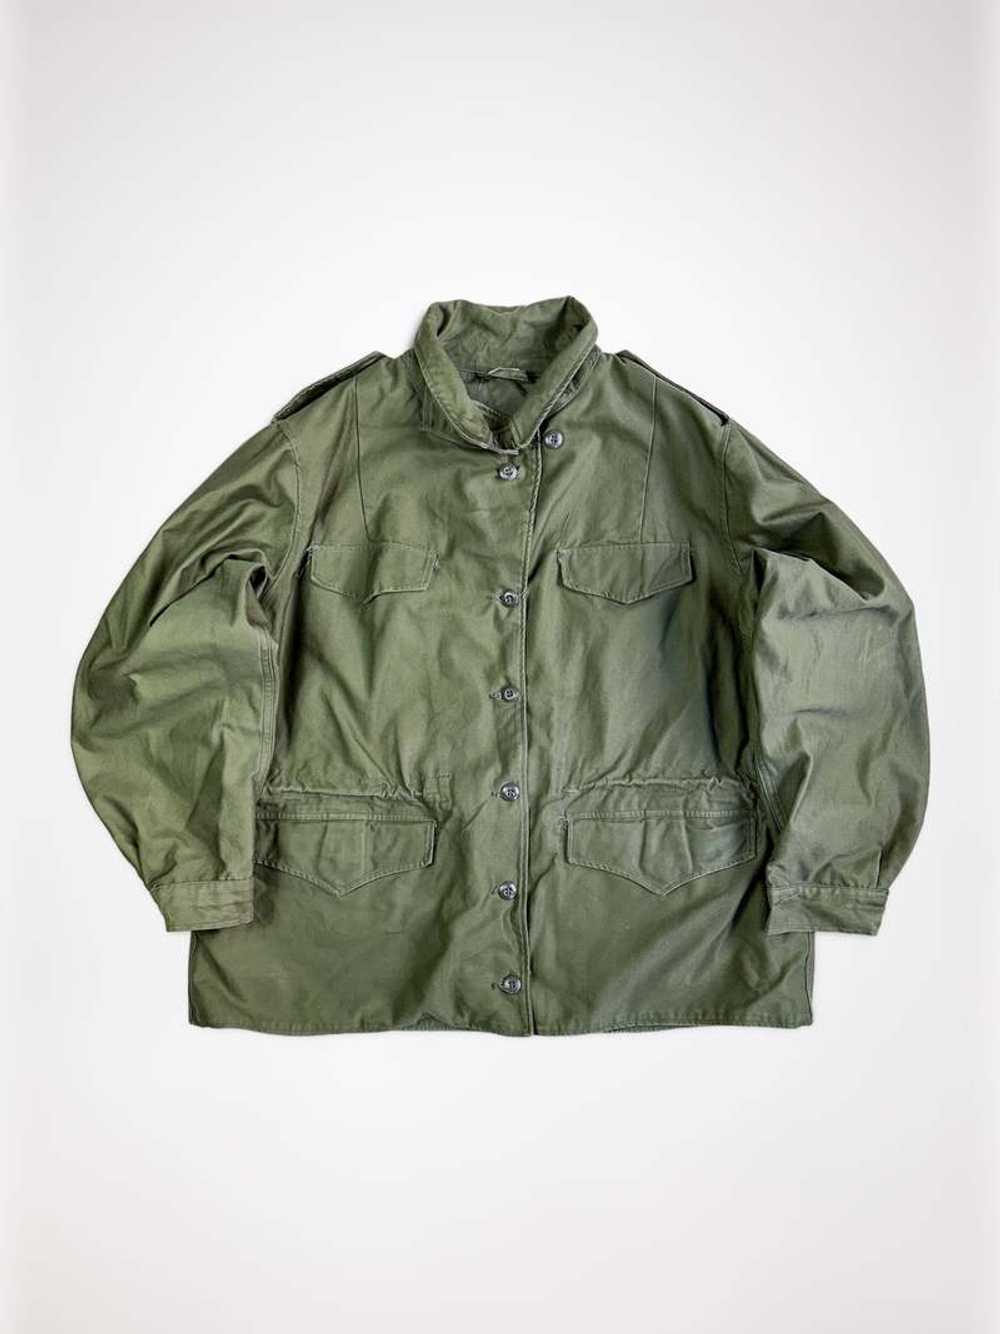 US M65 Olive Drab Button Up Field Jacket- 1960's - Gem